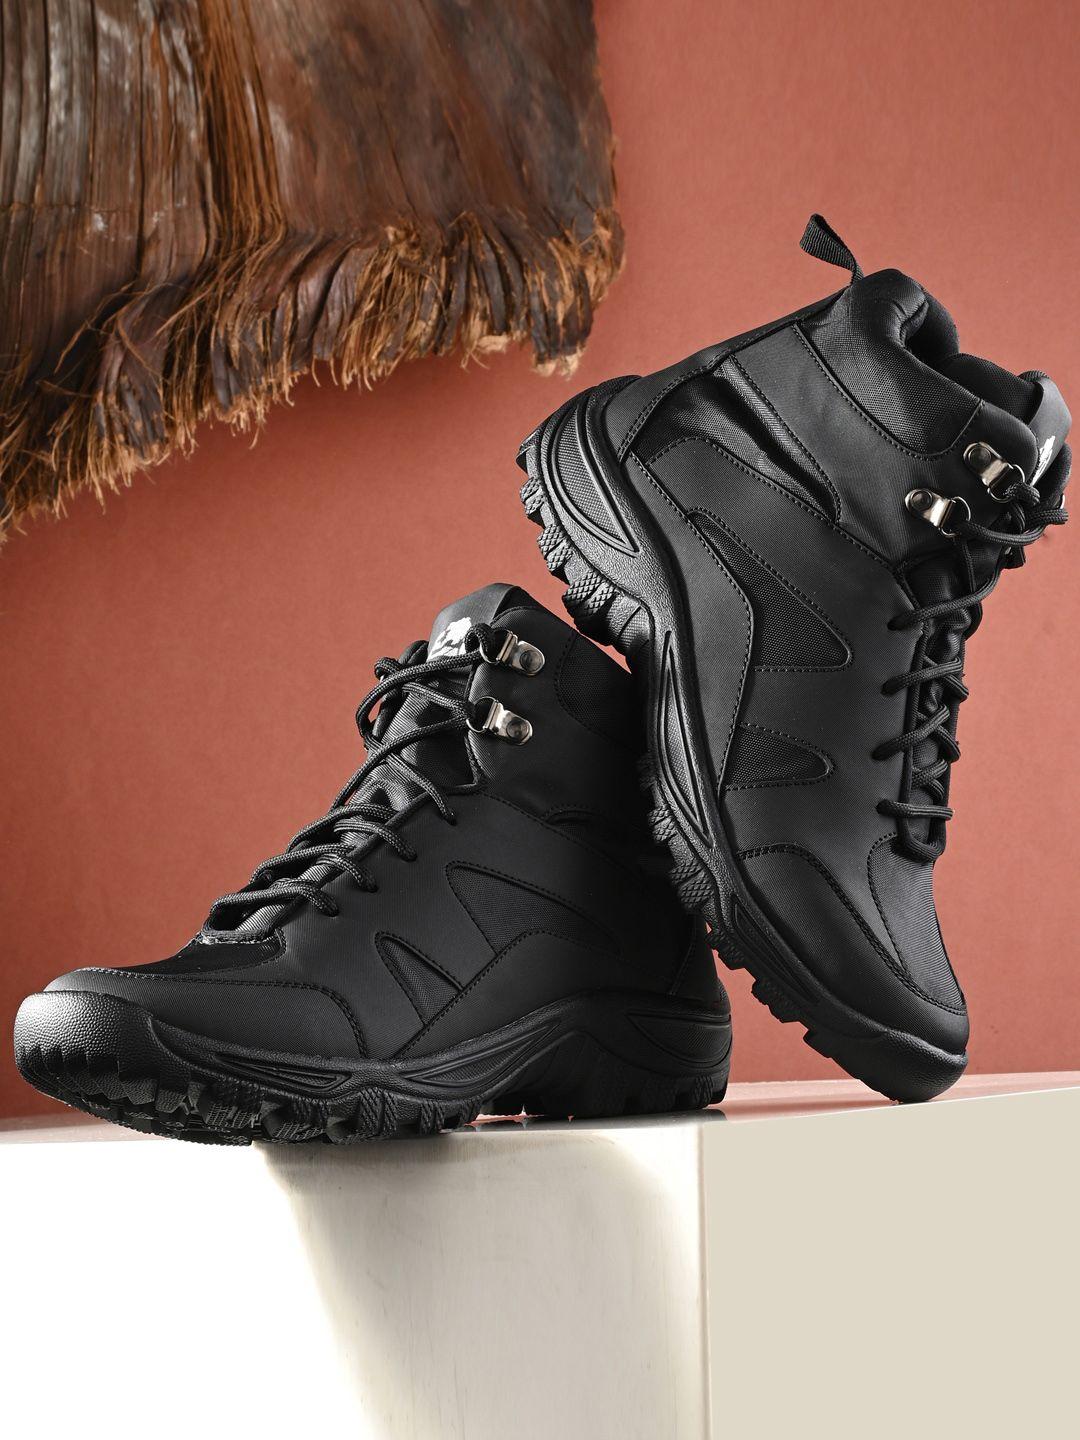 leo's fitness shoes men textured casual hiking boots